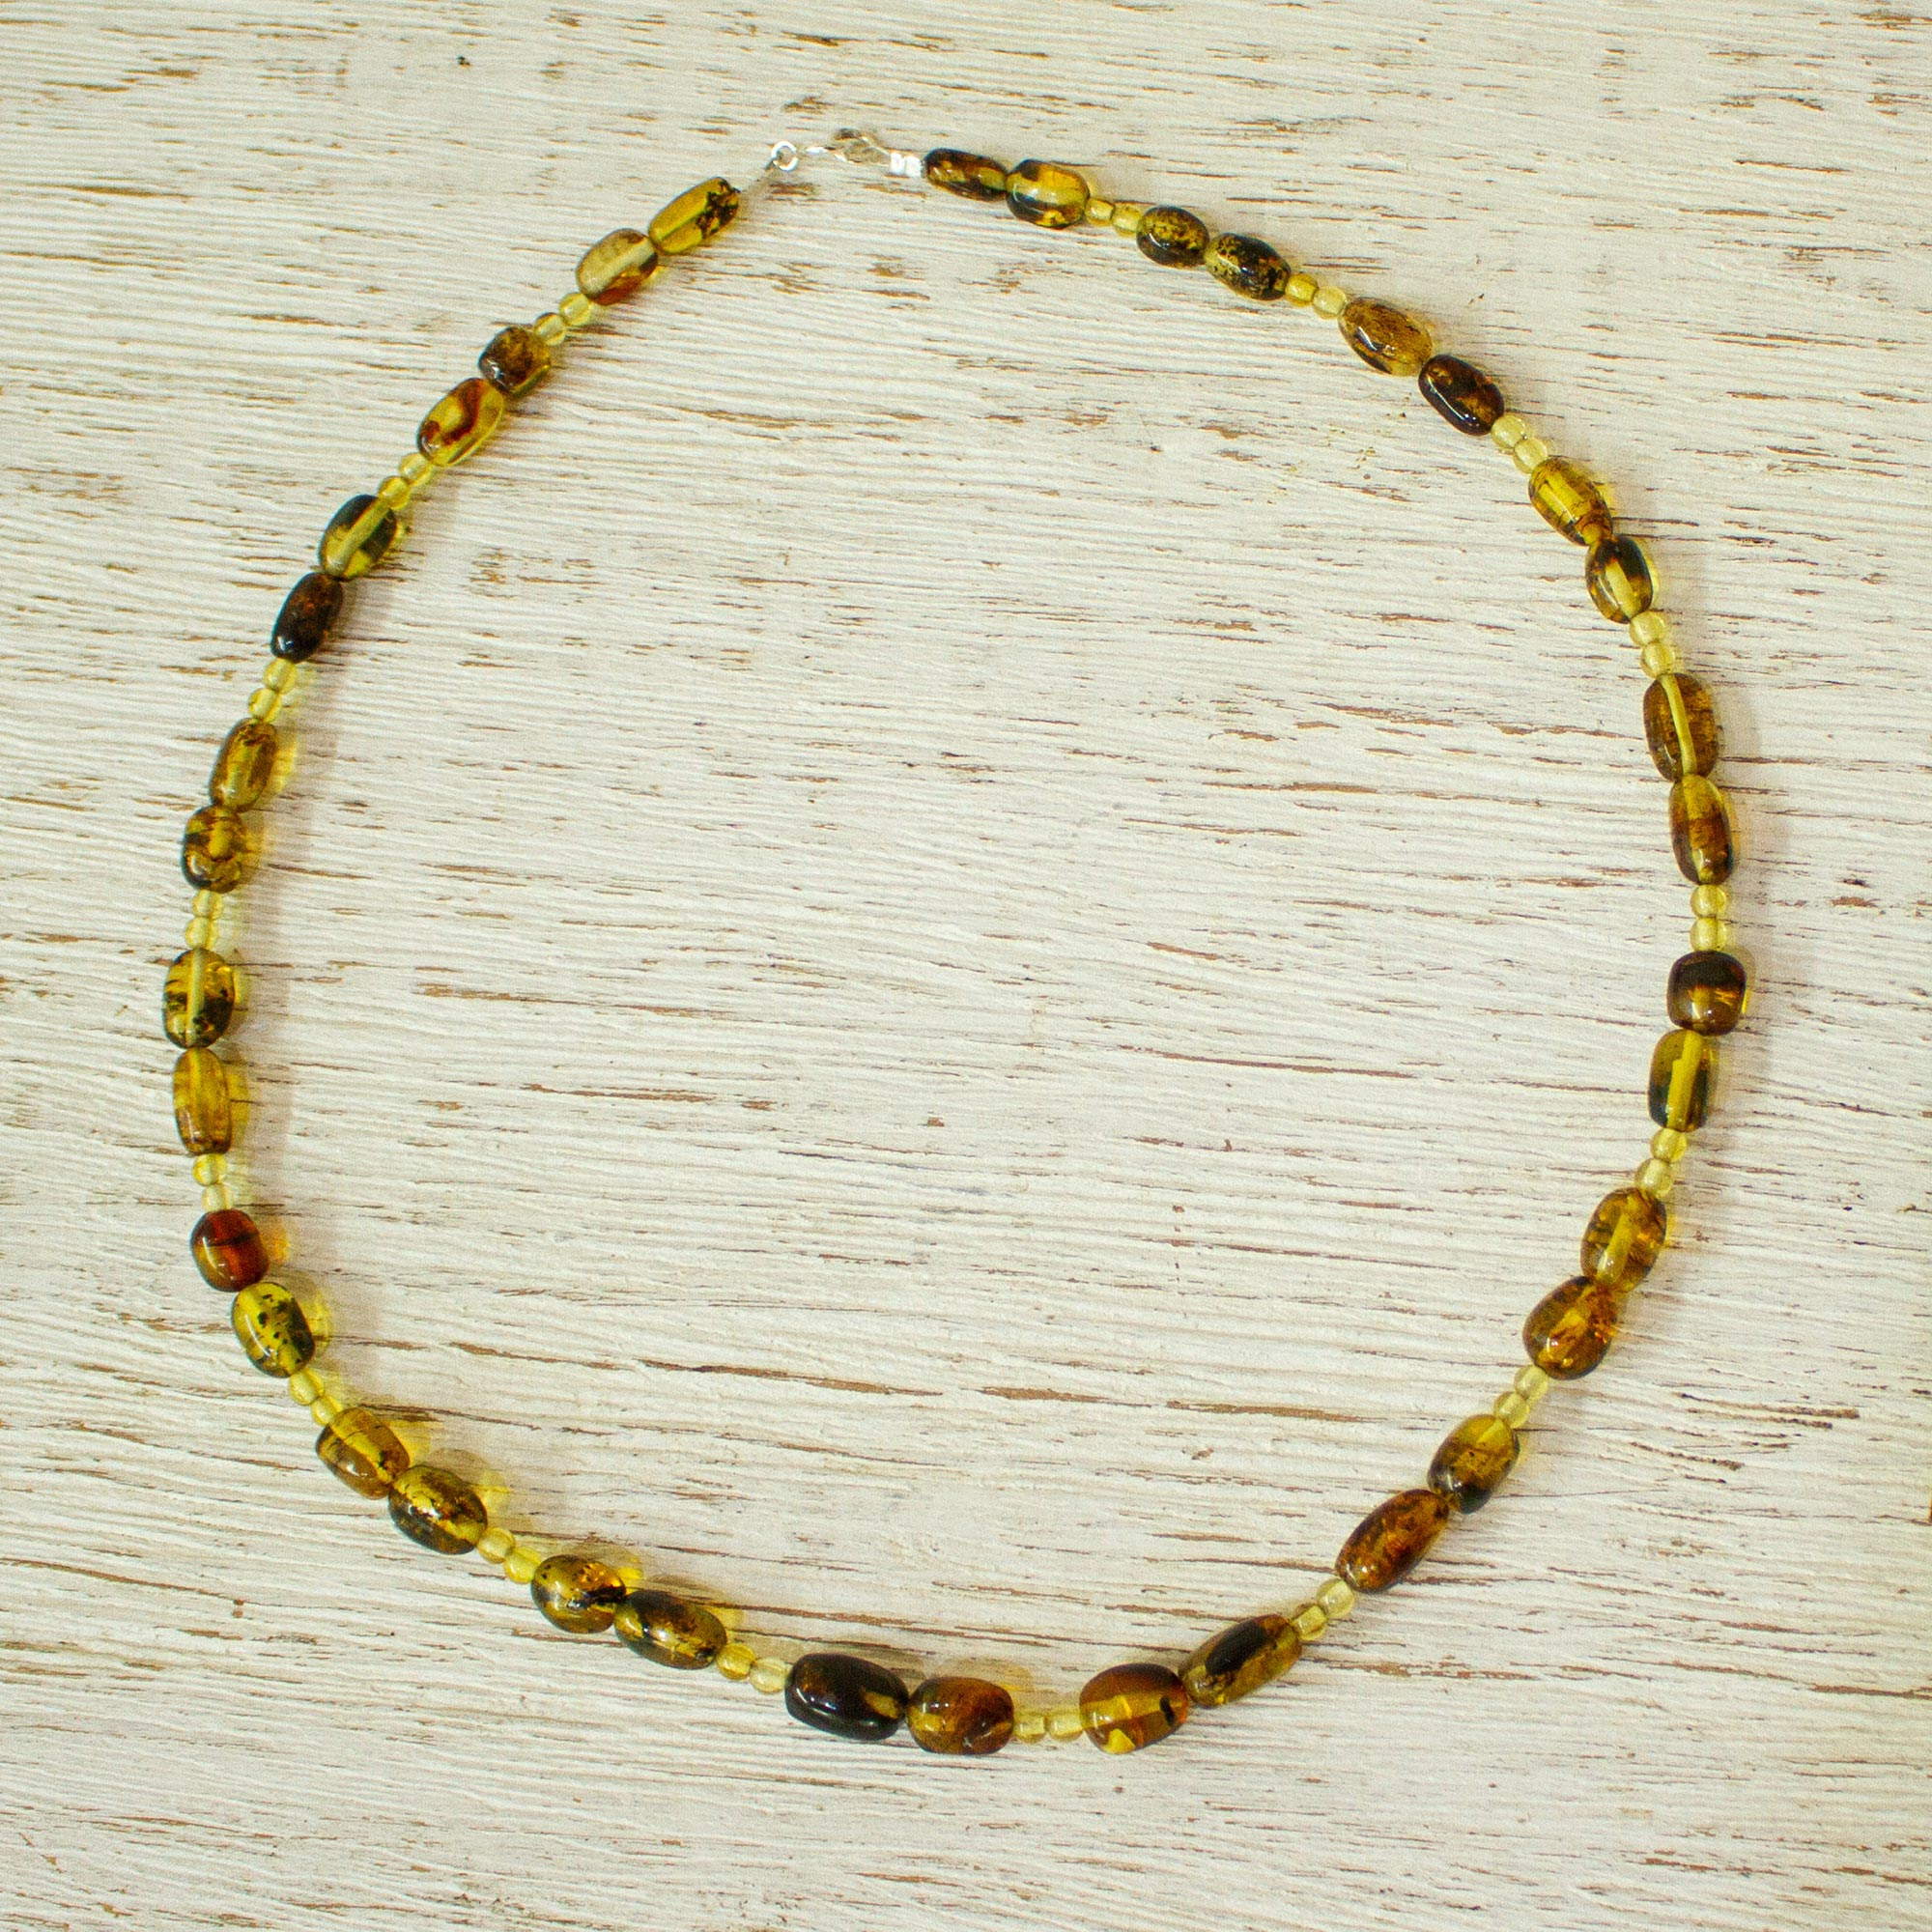 Amber Mens Necklace Black Amber Men's Beads Organic Jewelry Gift For Him Black Amber Organic Jewelry Unique Green Amber Beads Mens Necklace